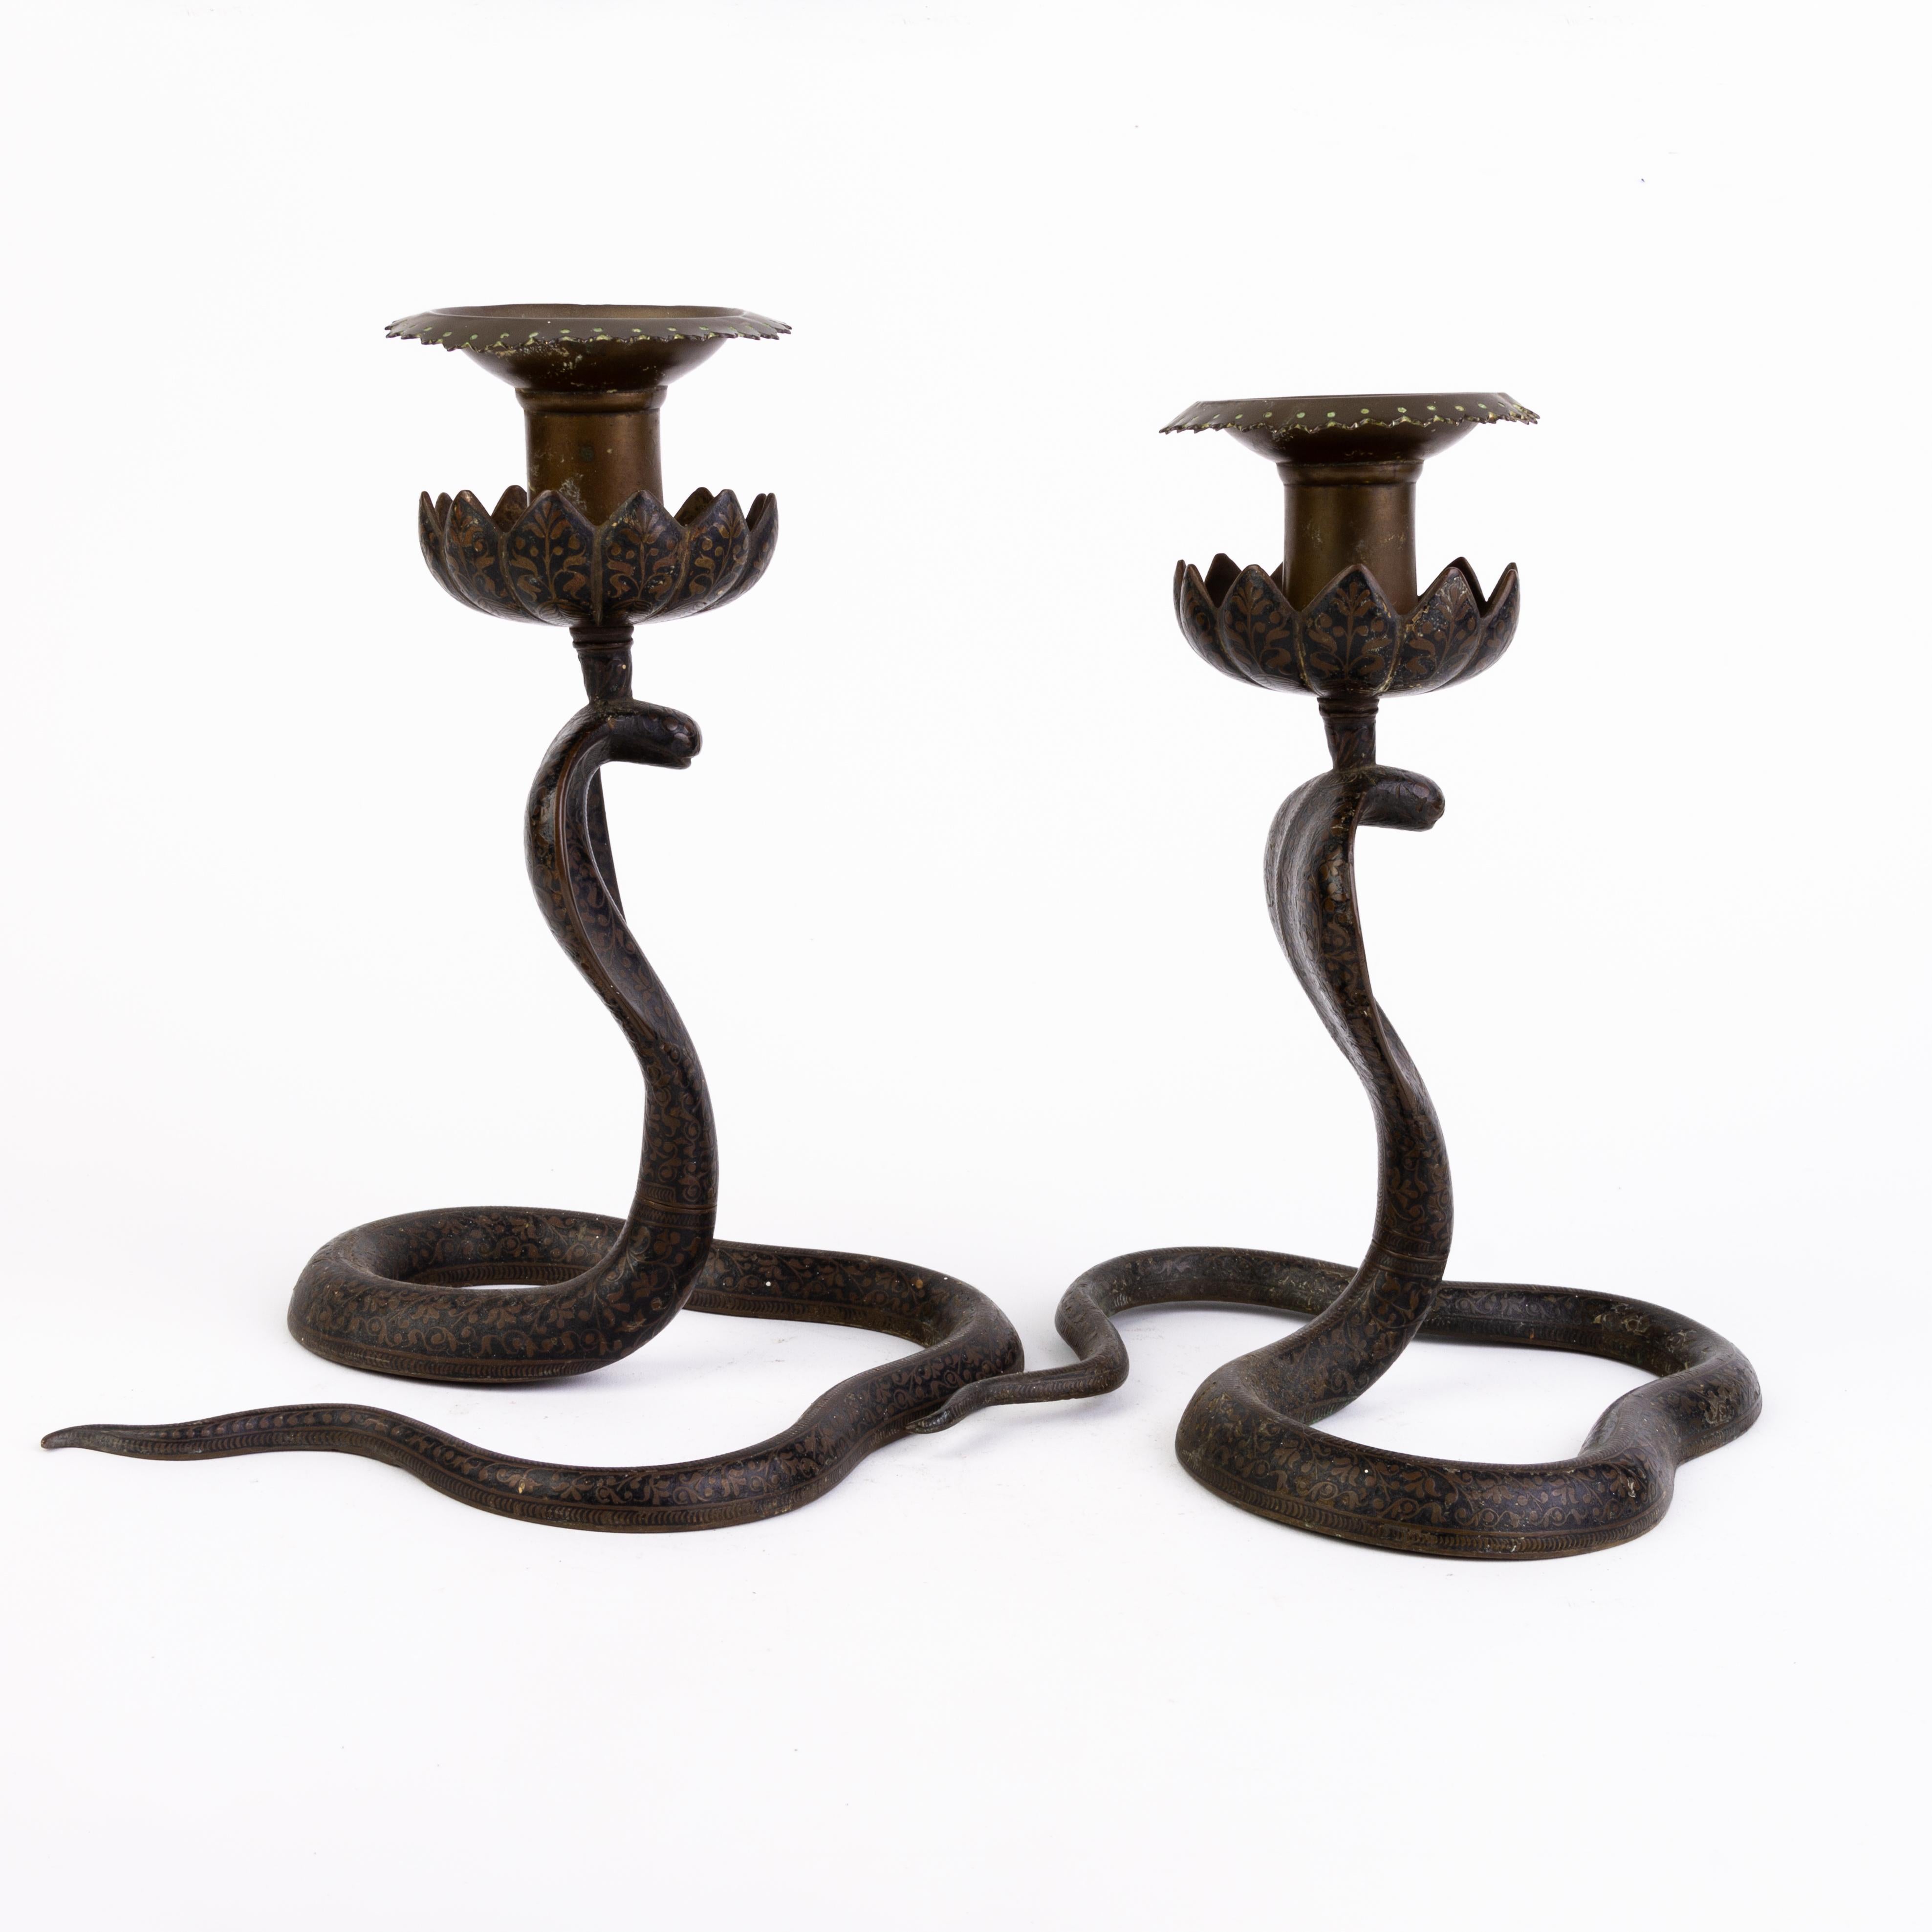 Victorian Pair of Orientalist Enameled Brass Cobra Snake Candelabras Sculpture 
Good condition overall
From a private collection.
Free international shipping.